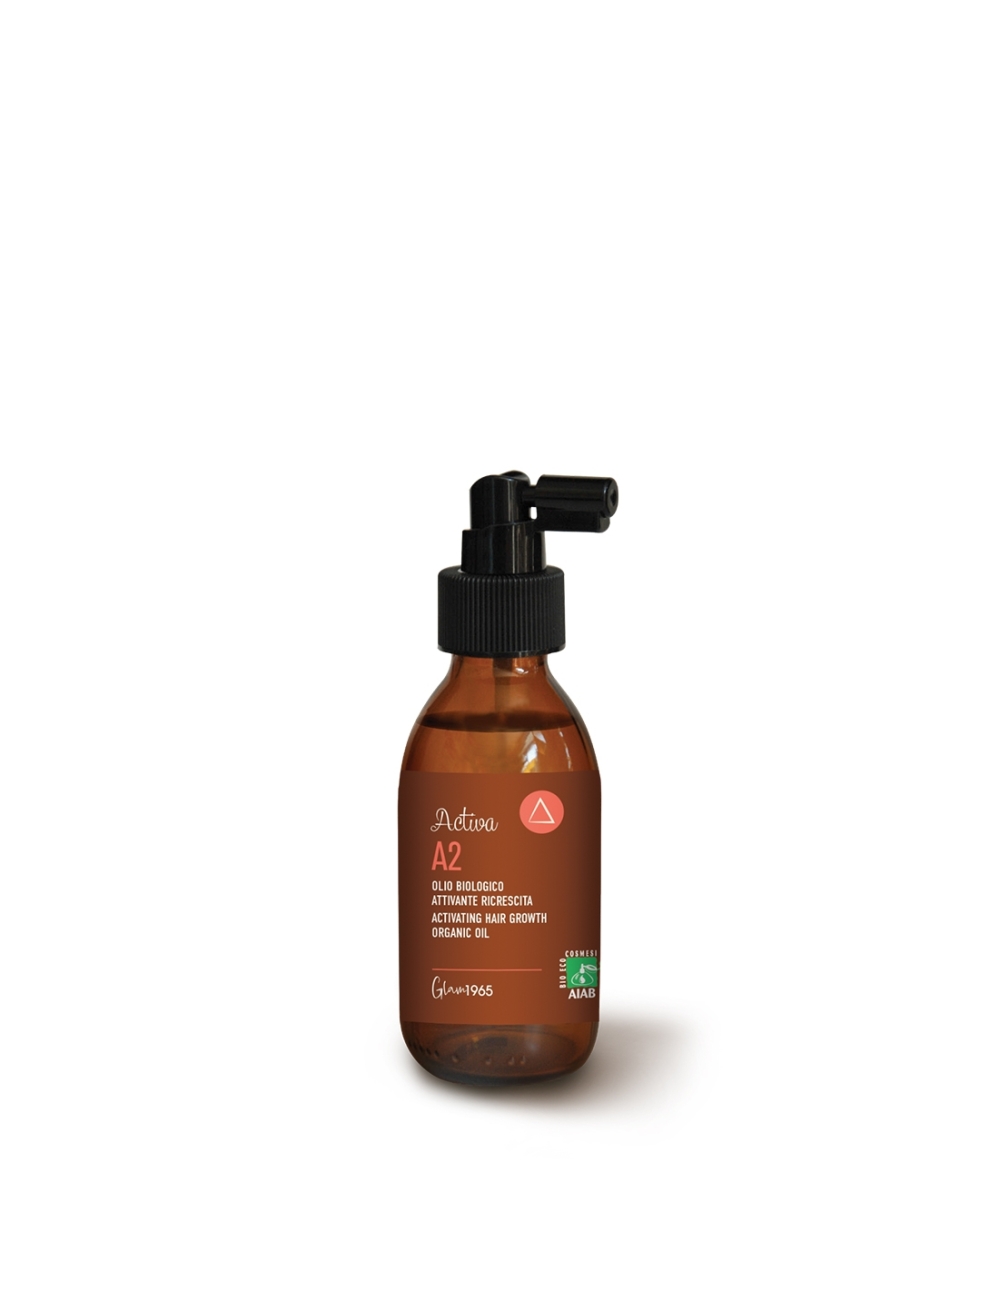 A2 | Activating hair growth organic oil